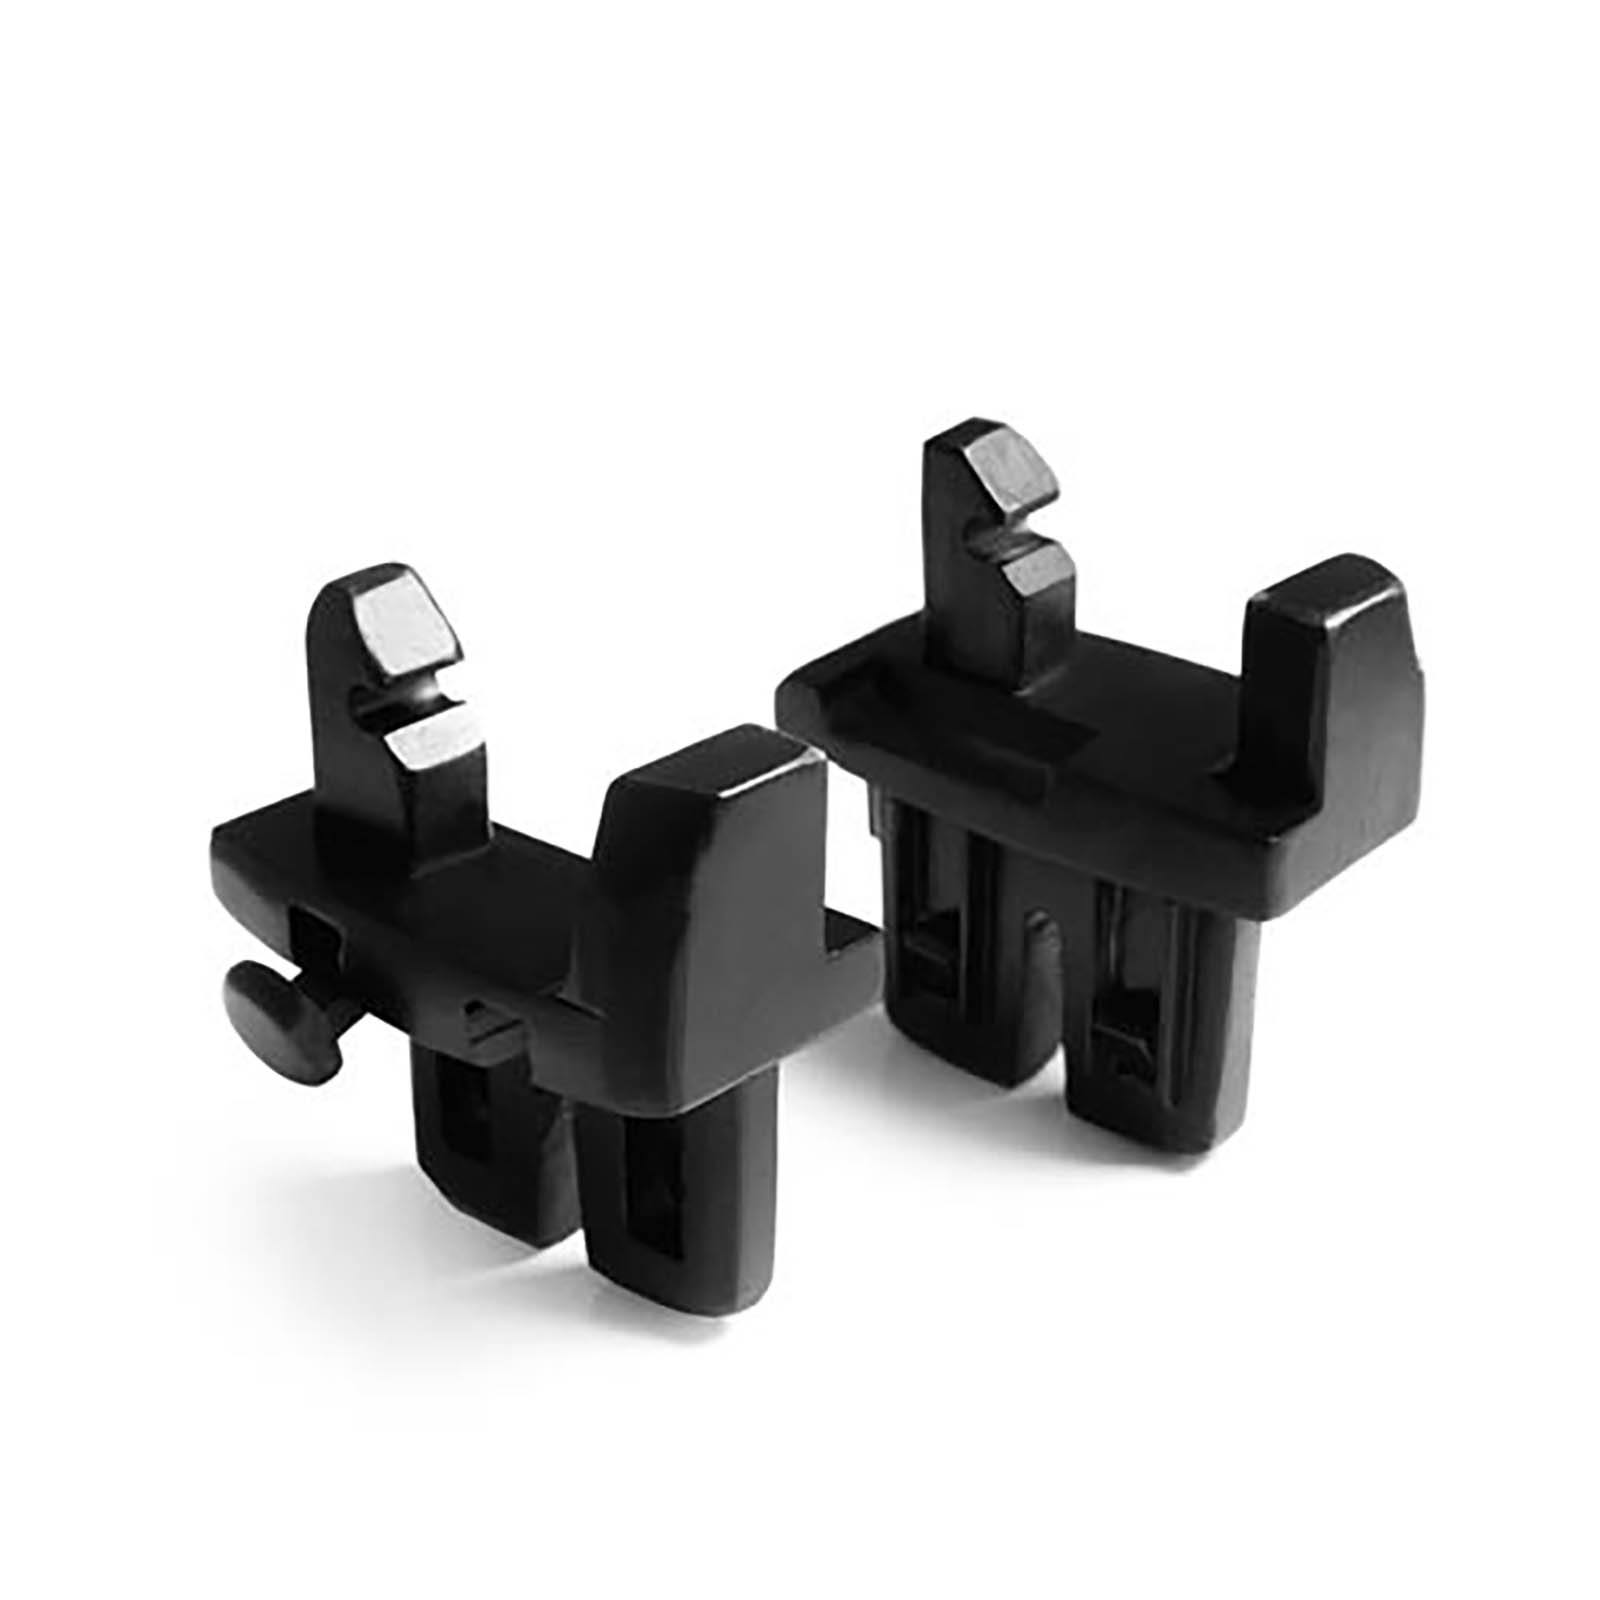 pushchair adapters